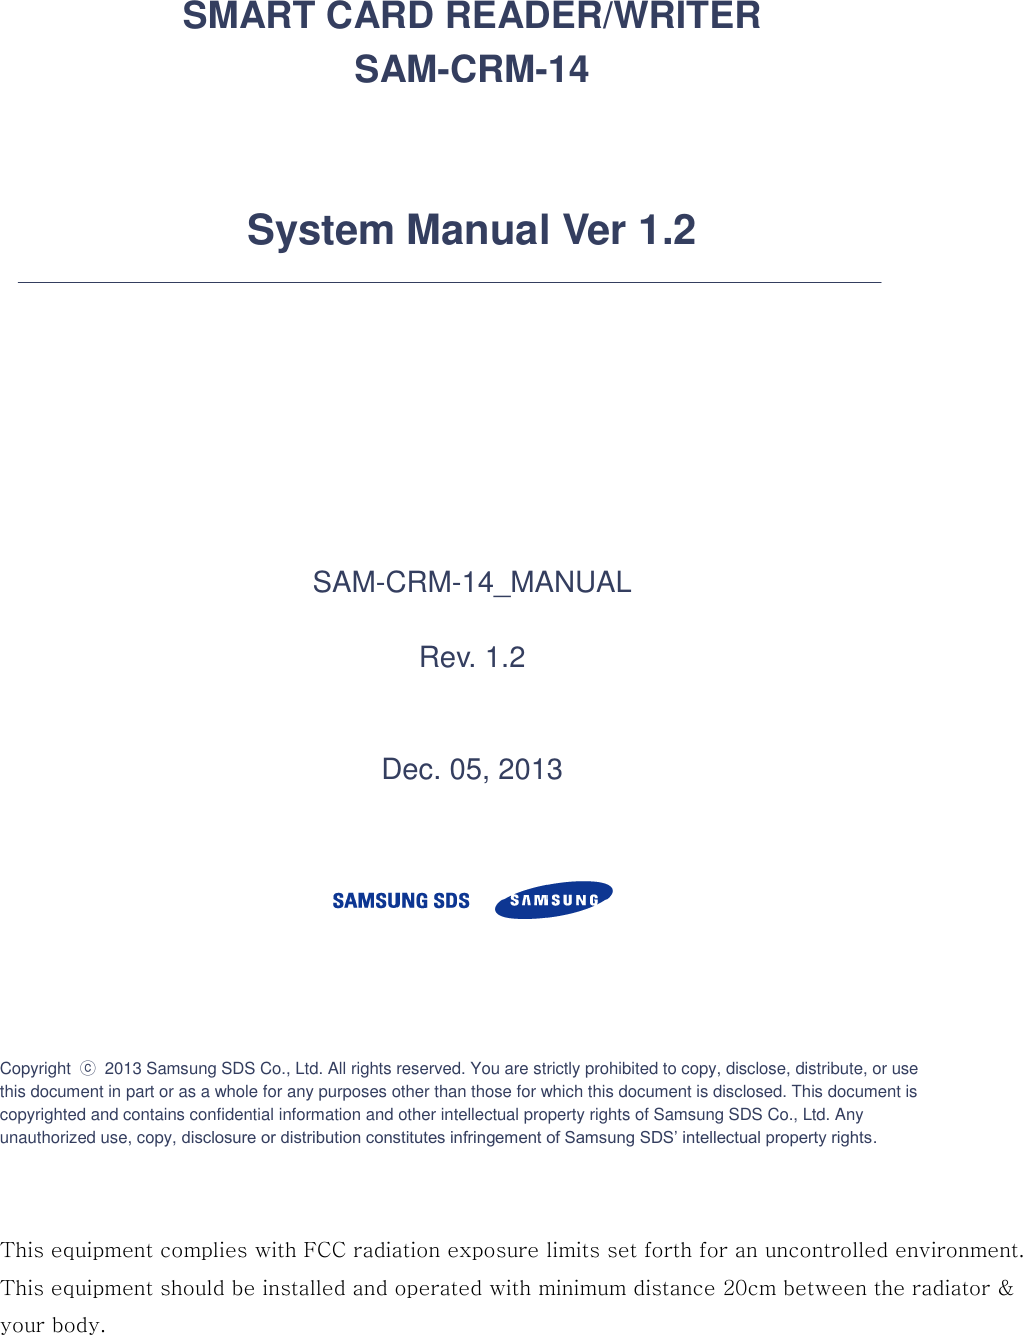     SMART CARD READER/WRITER SAM-CRM-14   System Manual Ver 1.2        SAM-CRM-14_MANUAL  Rev. 1.2   Dec. 05, 2013       Copyright  ⓒ 2013 Samsung SDS Co., Ltd. All rights reserved. You are strictly prohibited to copy, disclose, distribute, or use this document in part or as a whole for any purposes other than those for which this document is disclosed. This document is copyrighted and contains confidential information and other intellectual property rights of Samsung SDS Co., Ltd. Any unauthorized use, copy, disclosure or distribution constitutes infringement of Samsung SDS’ intellectual property rights.      This equipment complies with FCC radiation exposure limits set forth for an uncontrolled environment.  This equipment should be installed and operated with minimum distance 20cm between the radiator &amp;your body.   